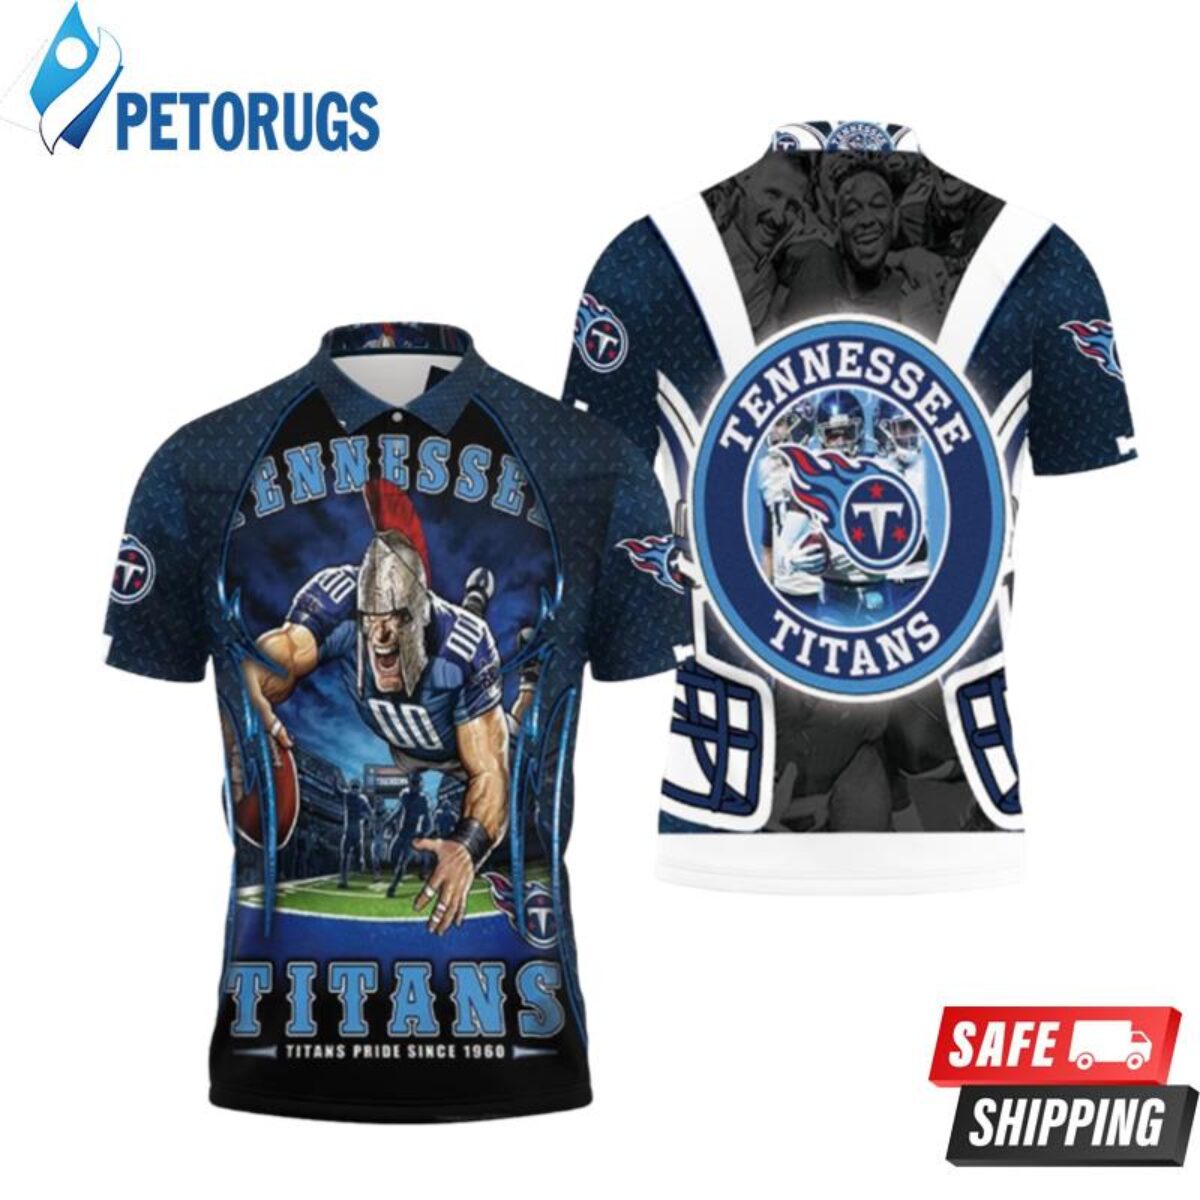 Art Tennessee Titans Pride Since 1960 Afc South Division Champions Super  Bowl 2021 Polo Shirts - Peto Rugs